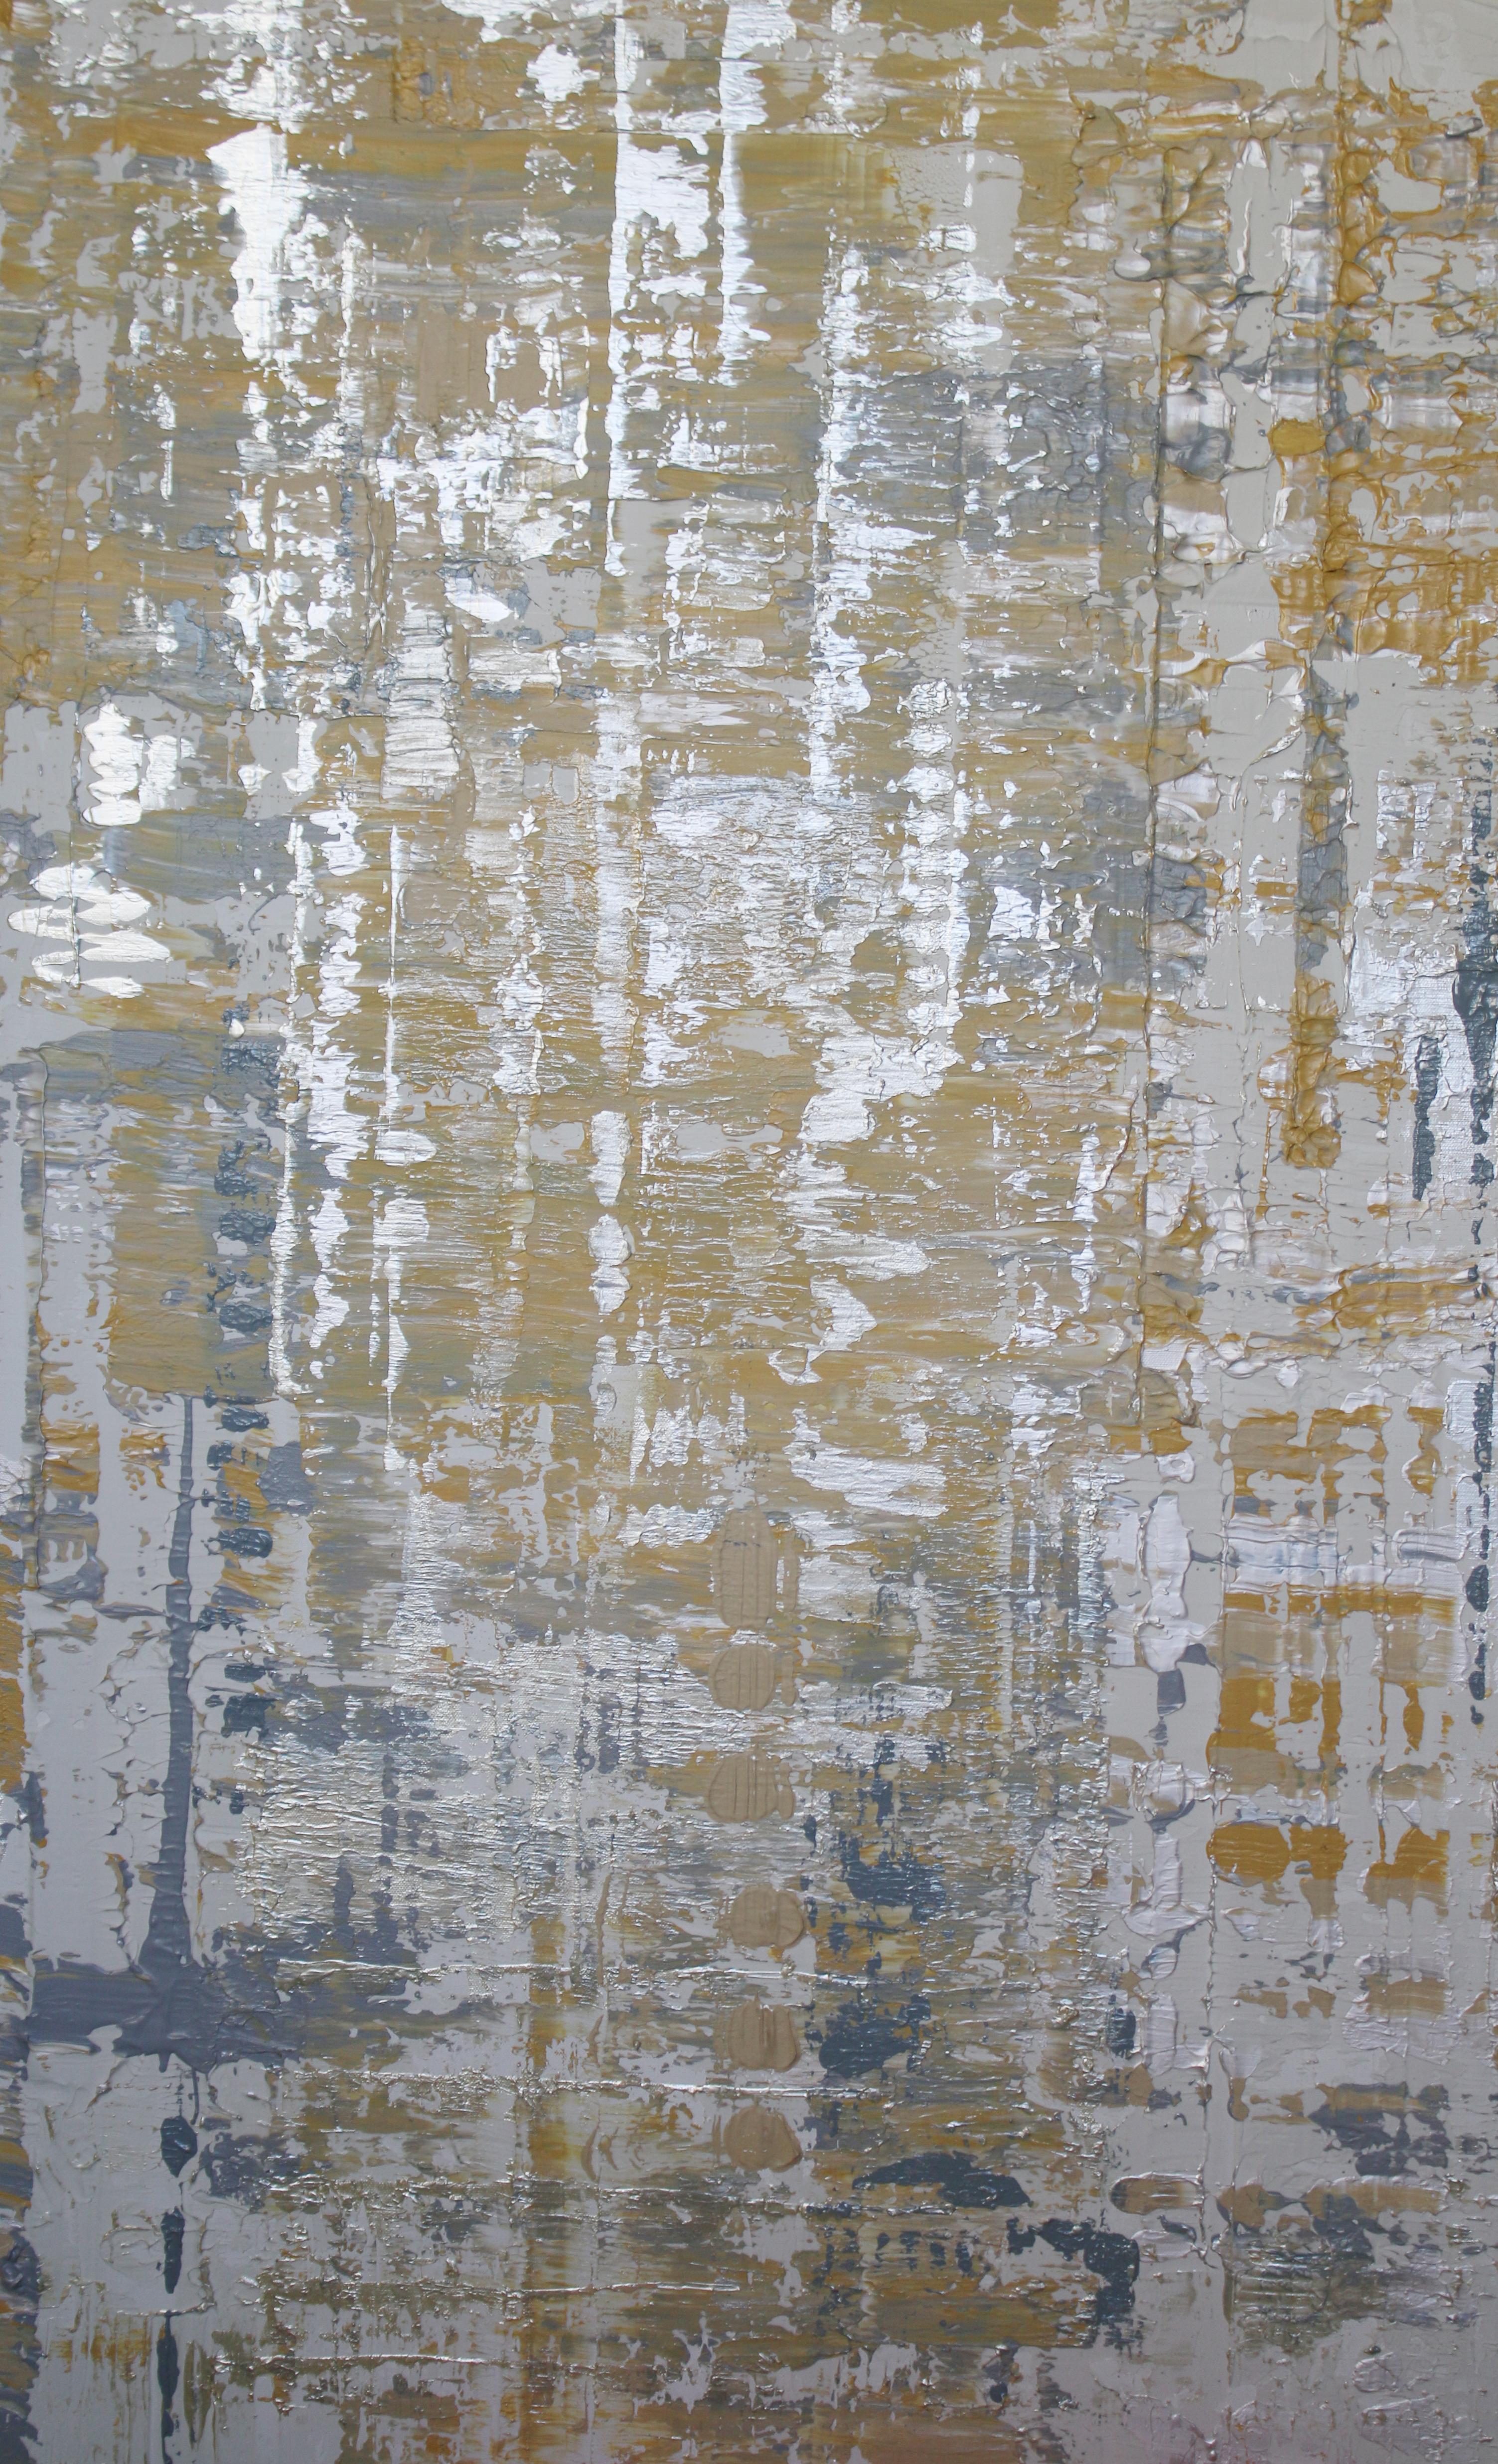 Irena Orlov Abstract Painting - Abstract Silver Yellow Heavy Textured Mixed Medium on Canvas, Silver Wave 30x48"